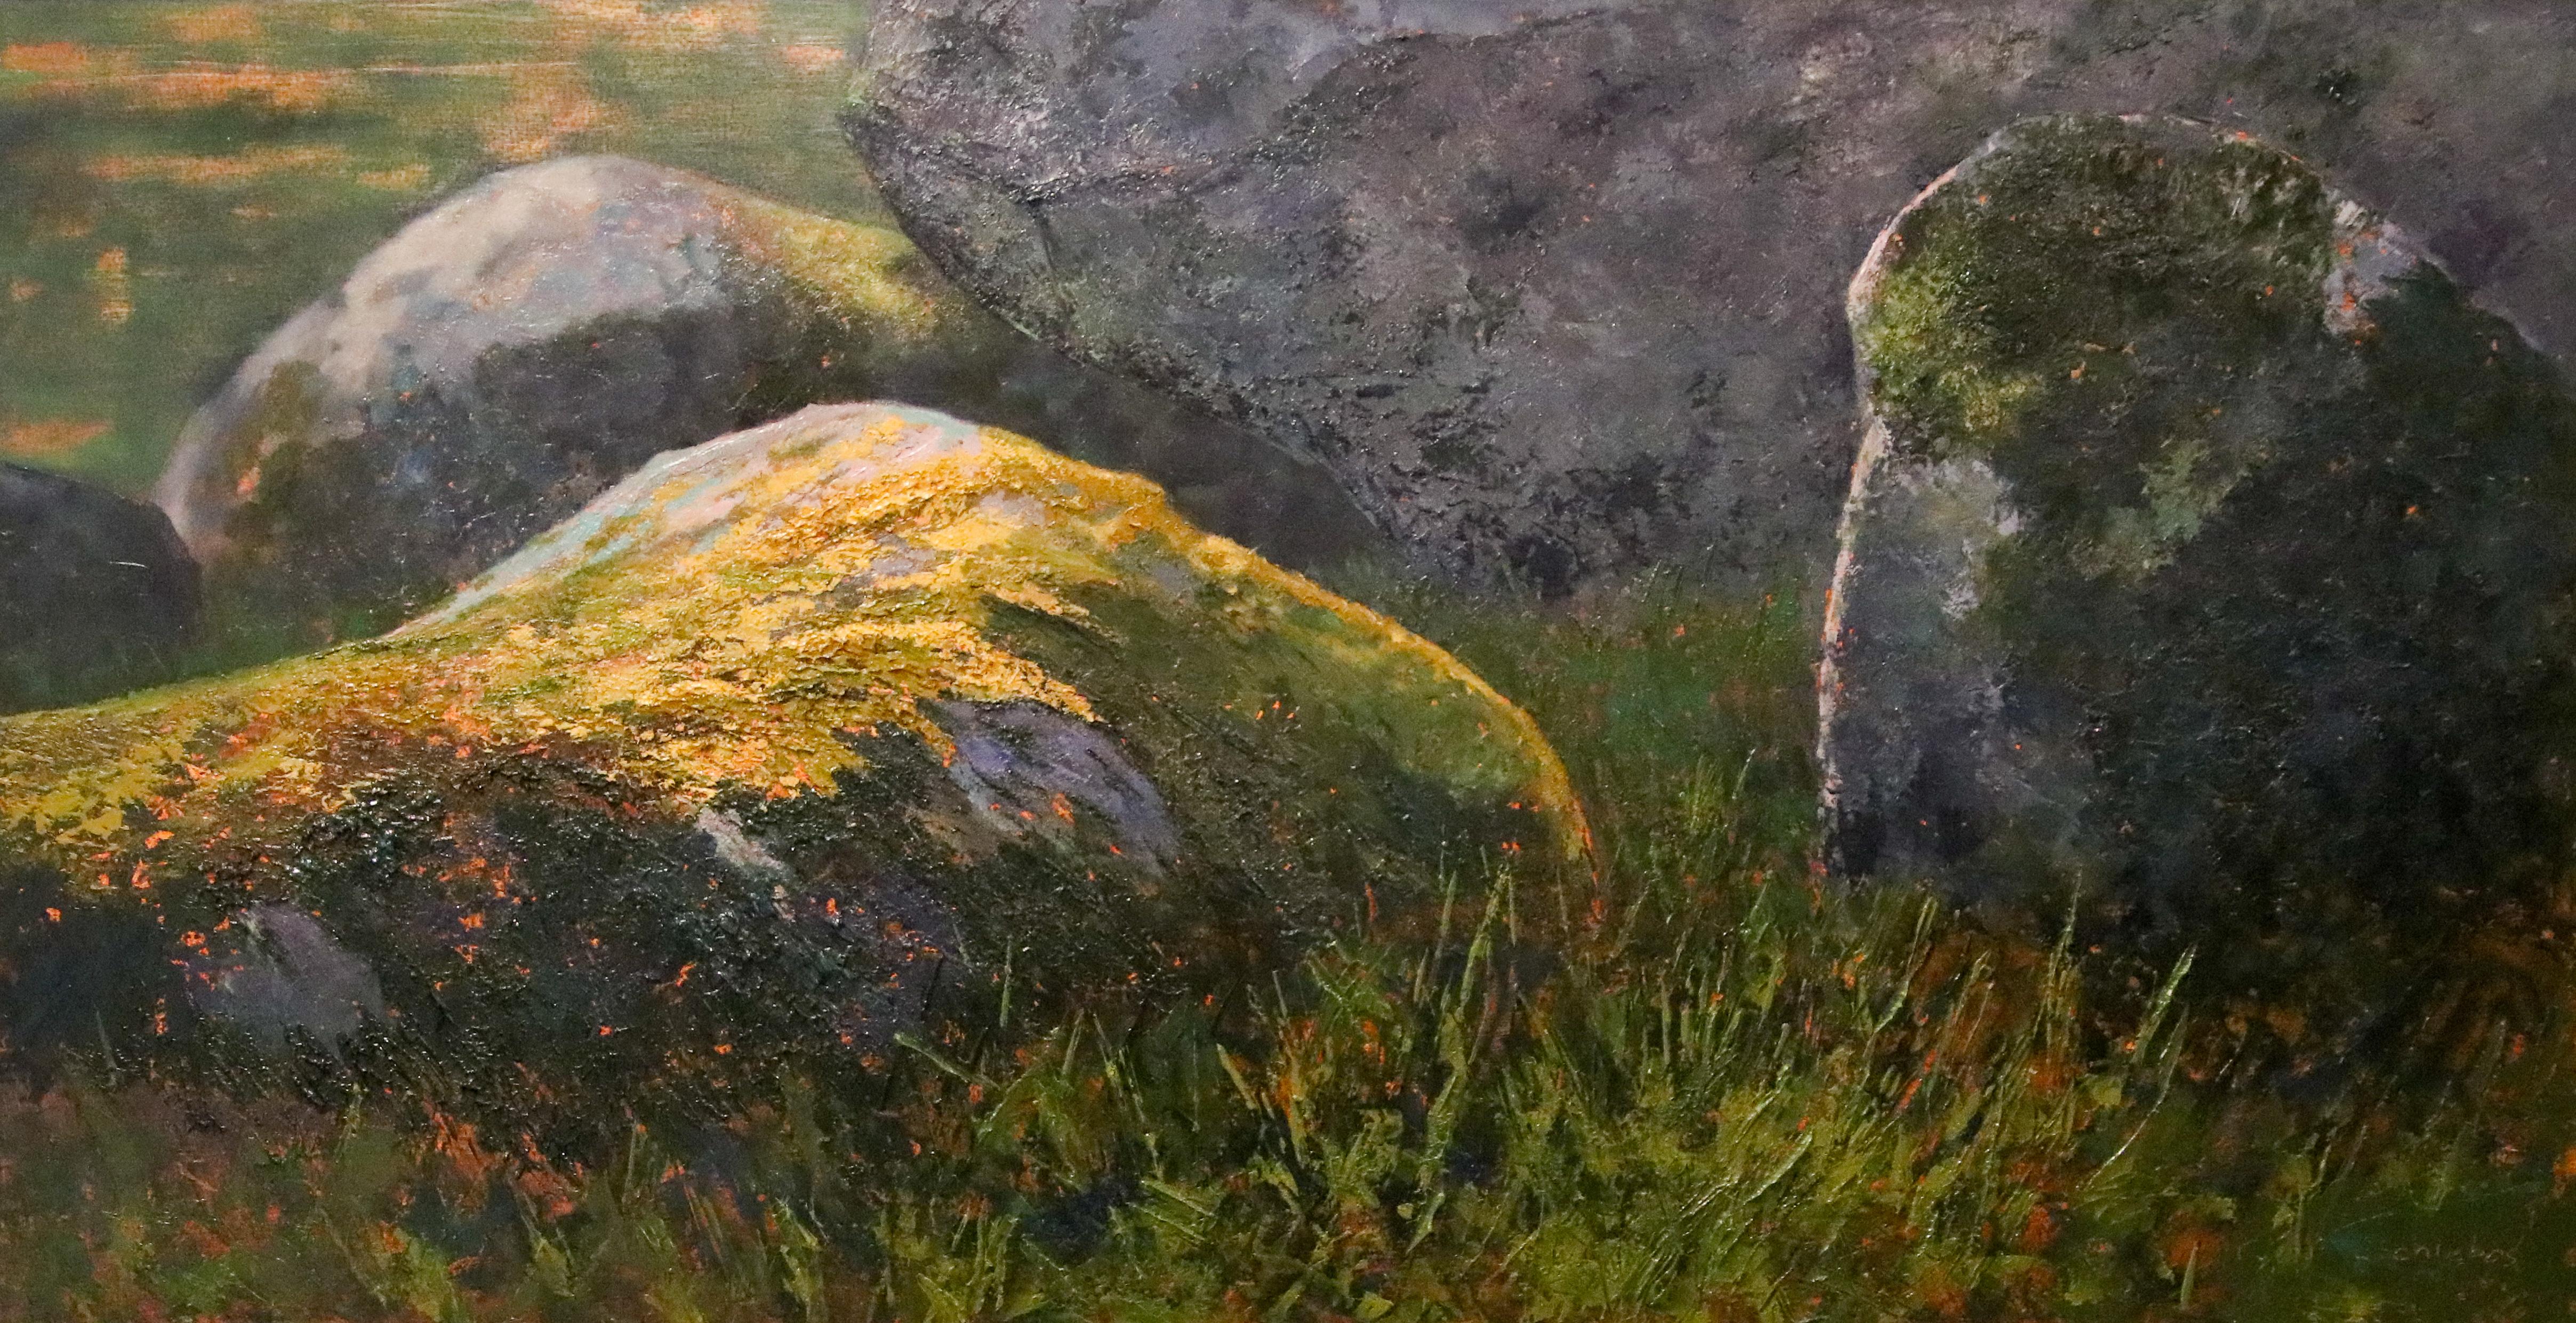 Moss - 21st Century Contemporary landscapepainting of stones in nature